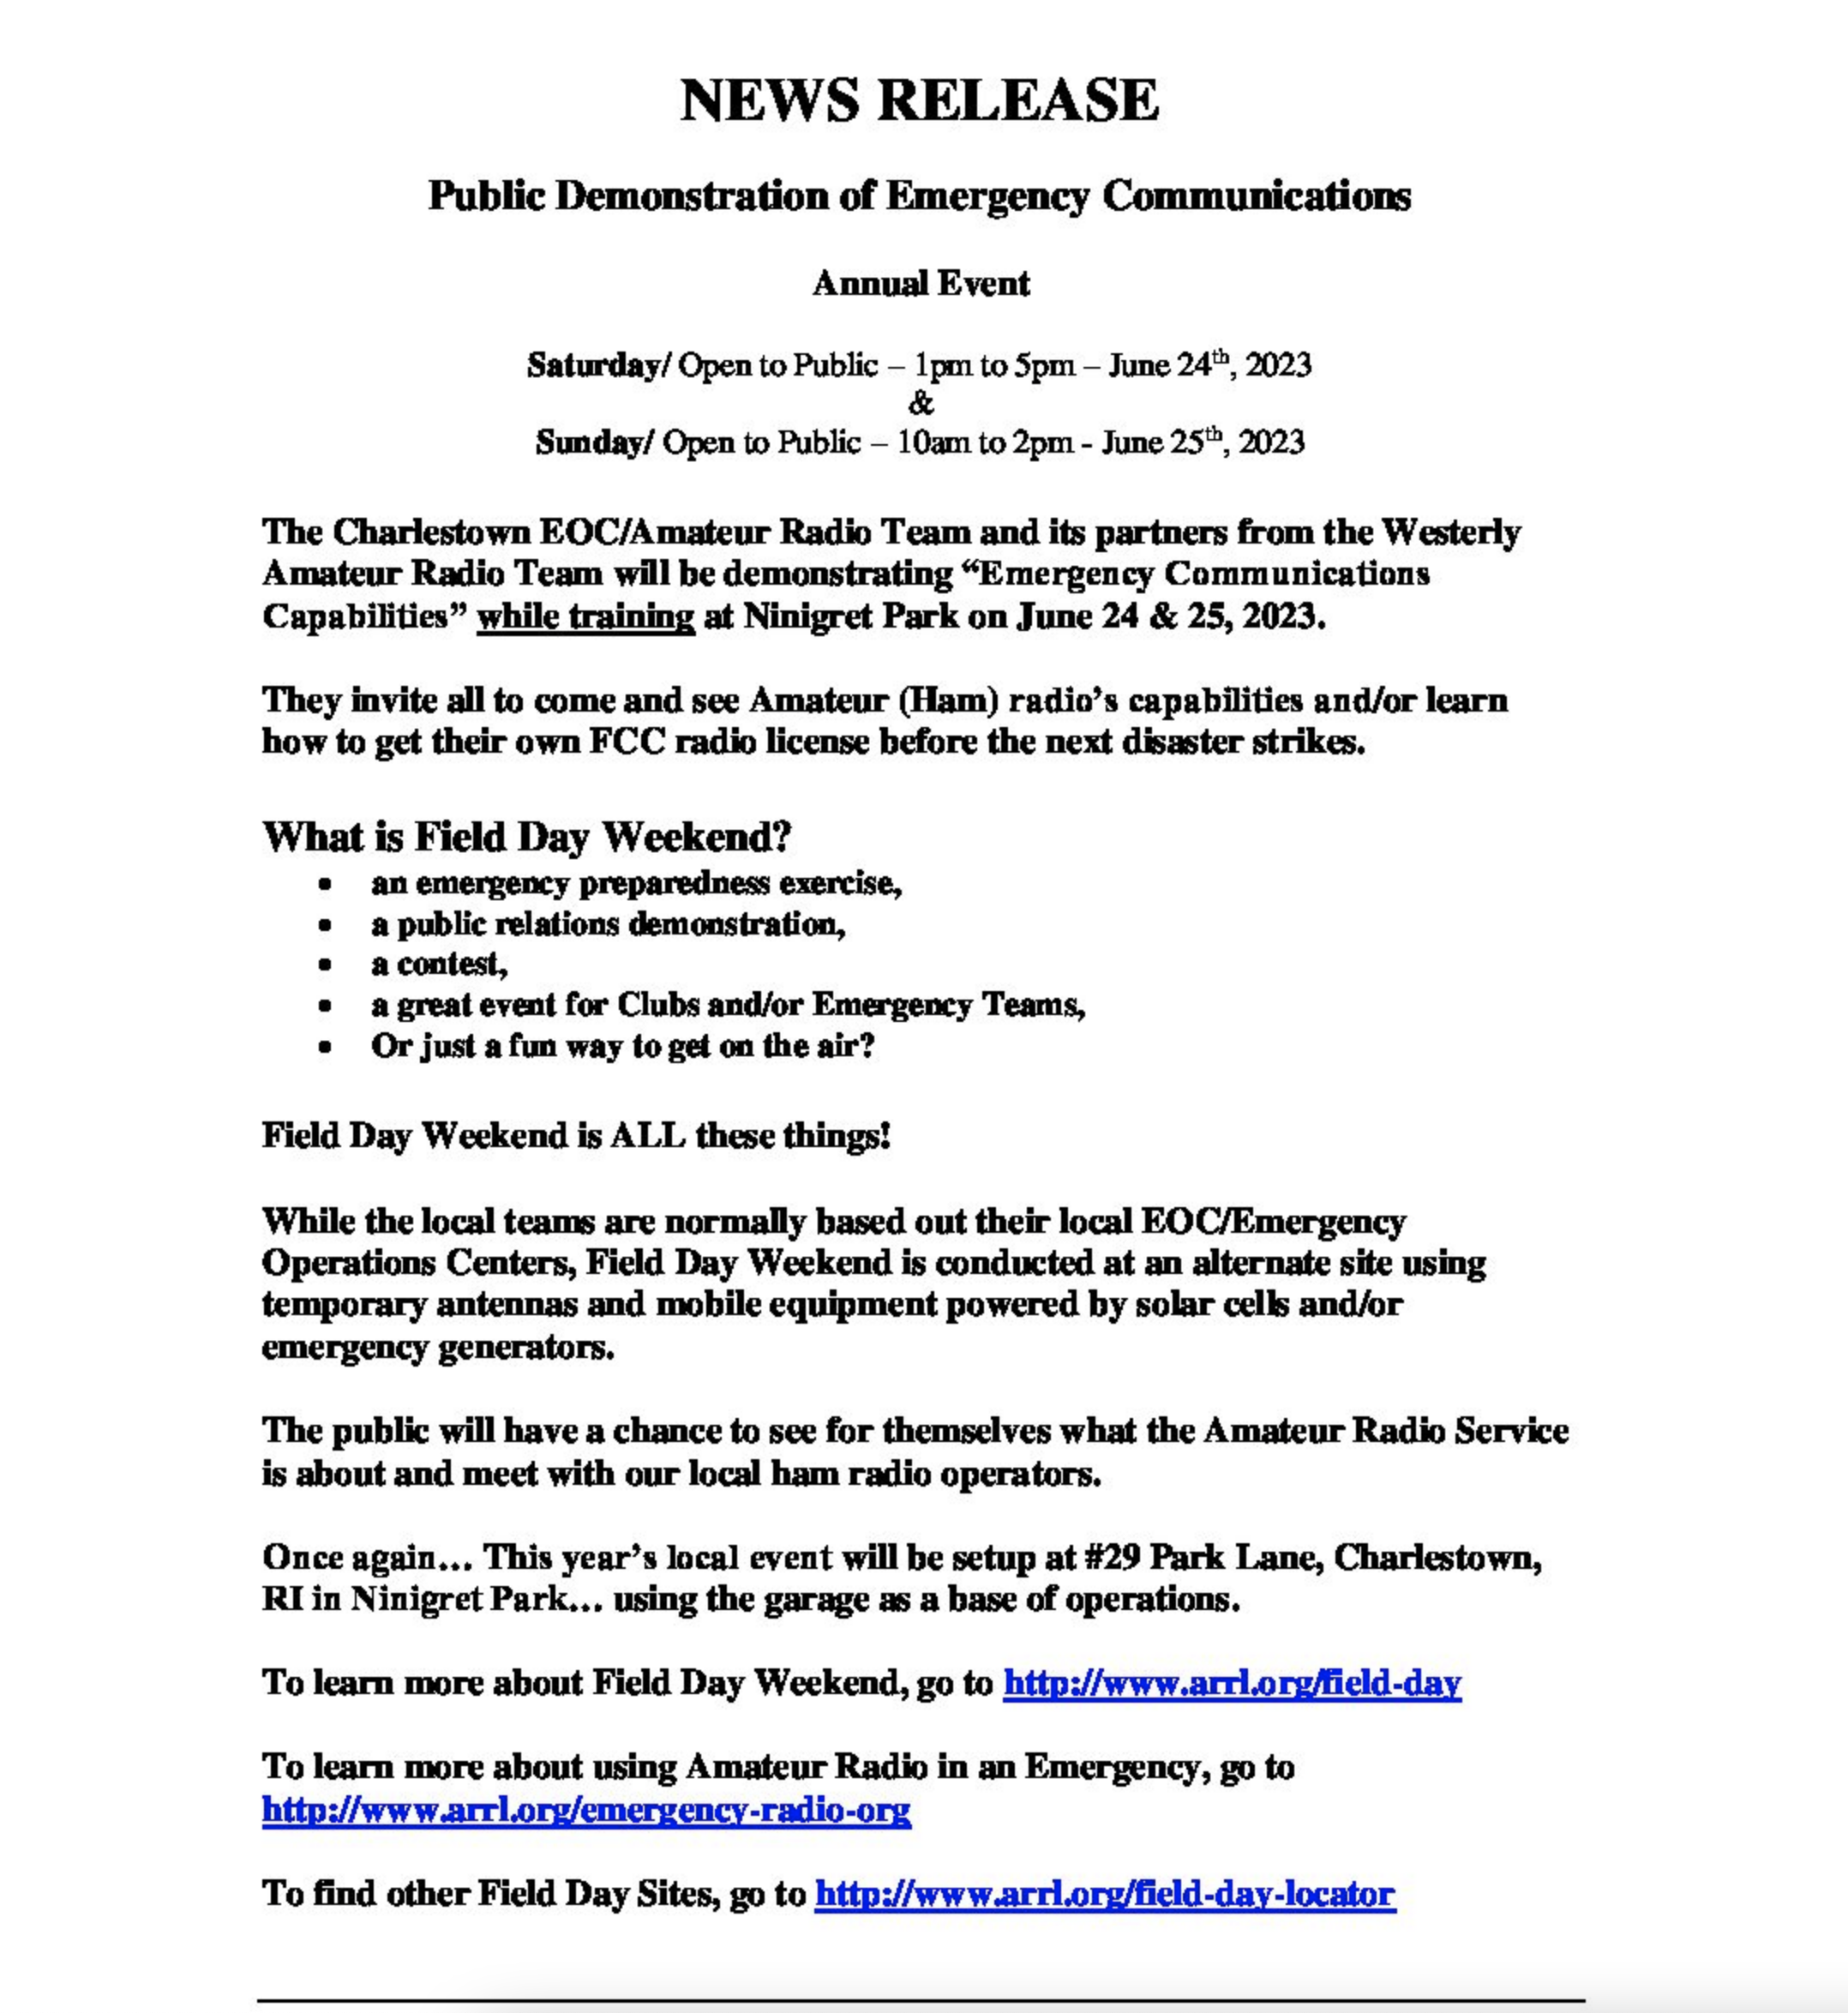 Charlestown EOC, Westerly ART Field Day announcement